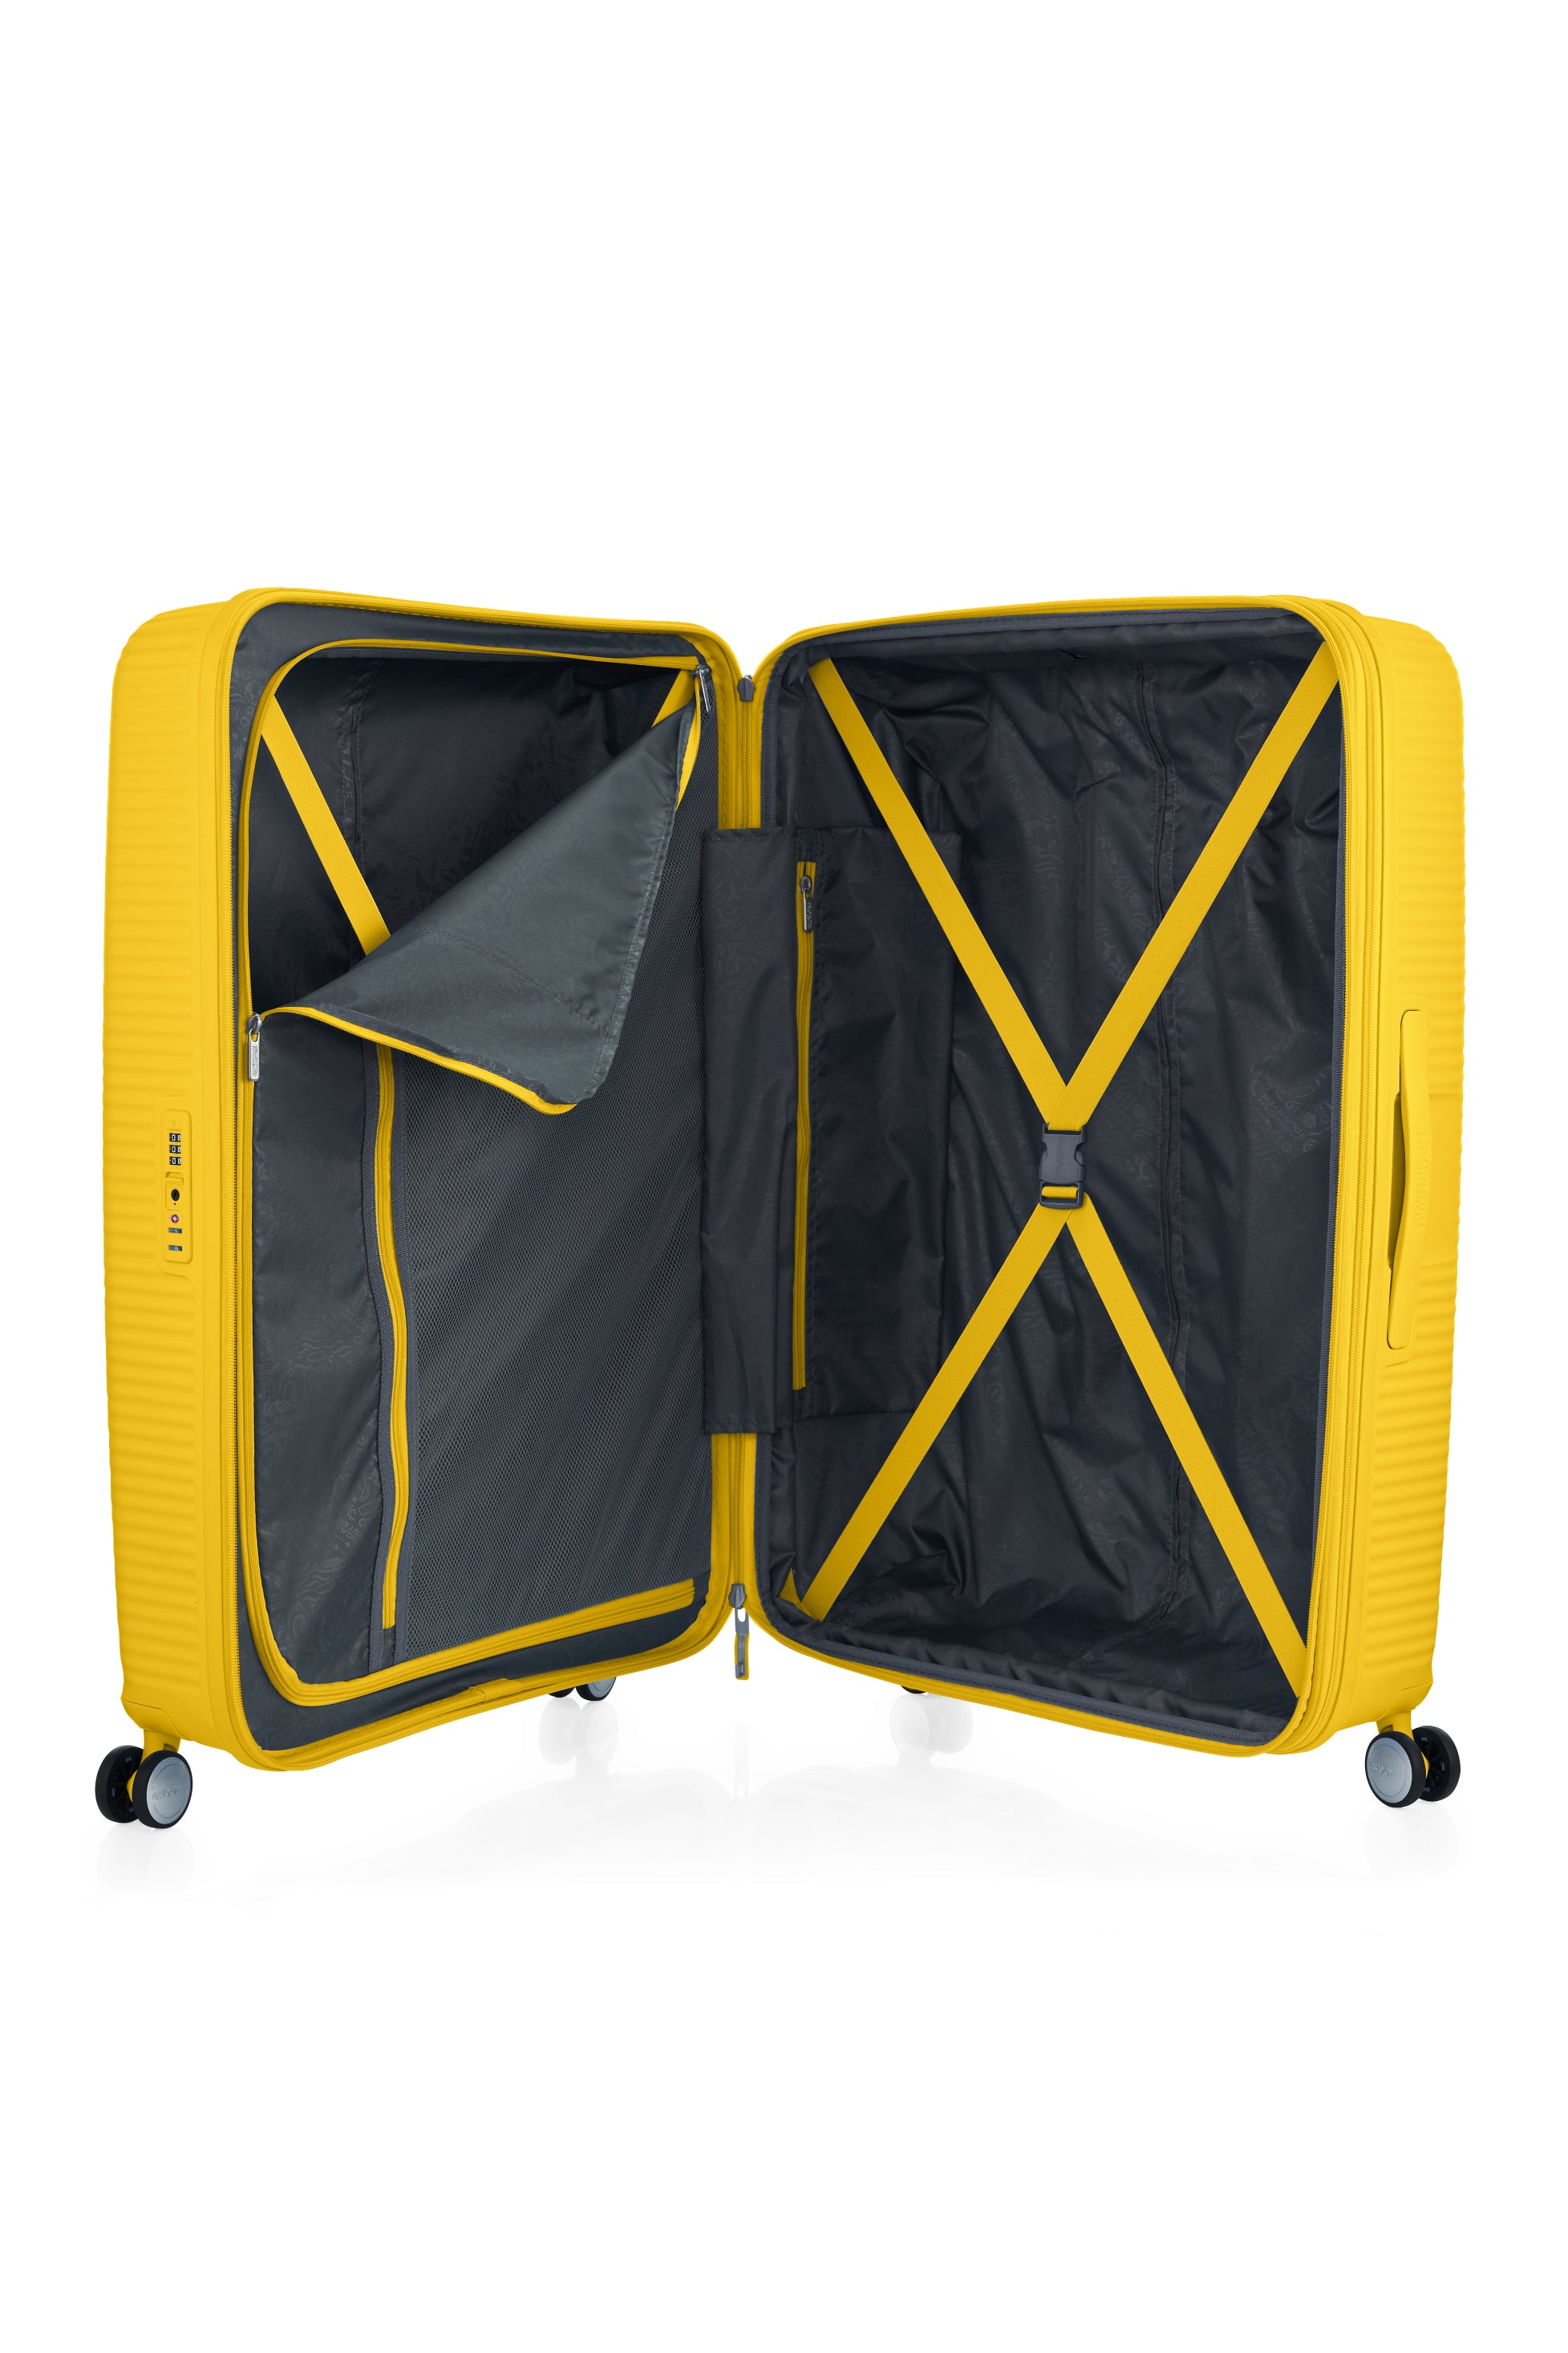 American Tourister - Curio 2.0 80cm Large Suitcase - Golden Yellow-10